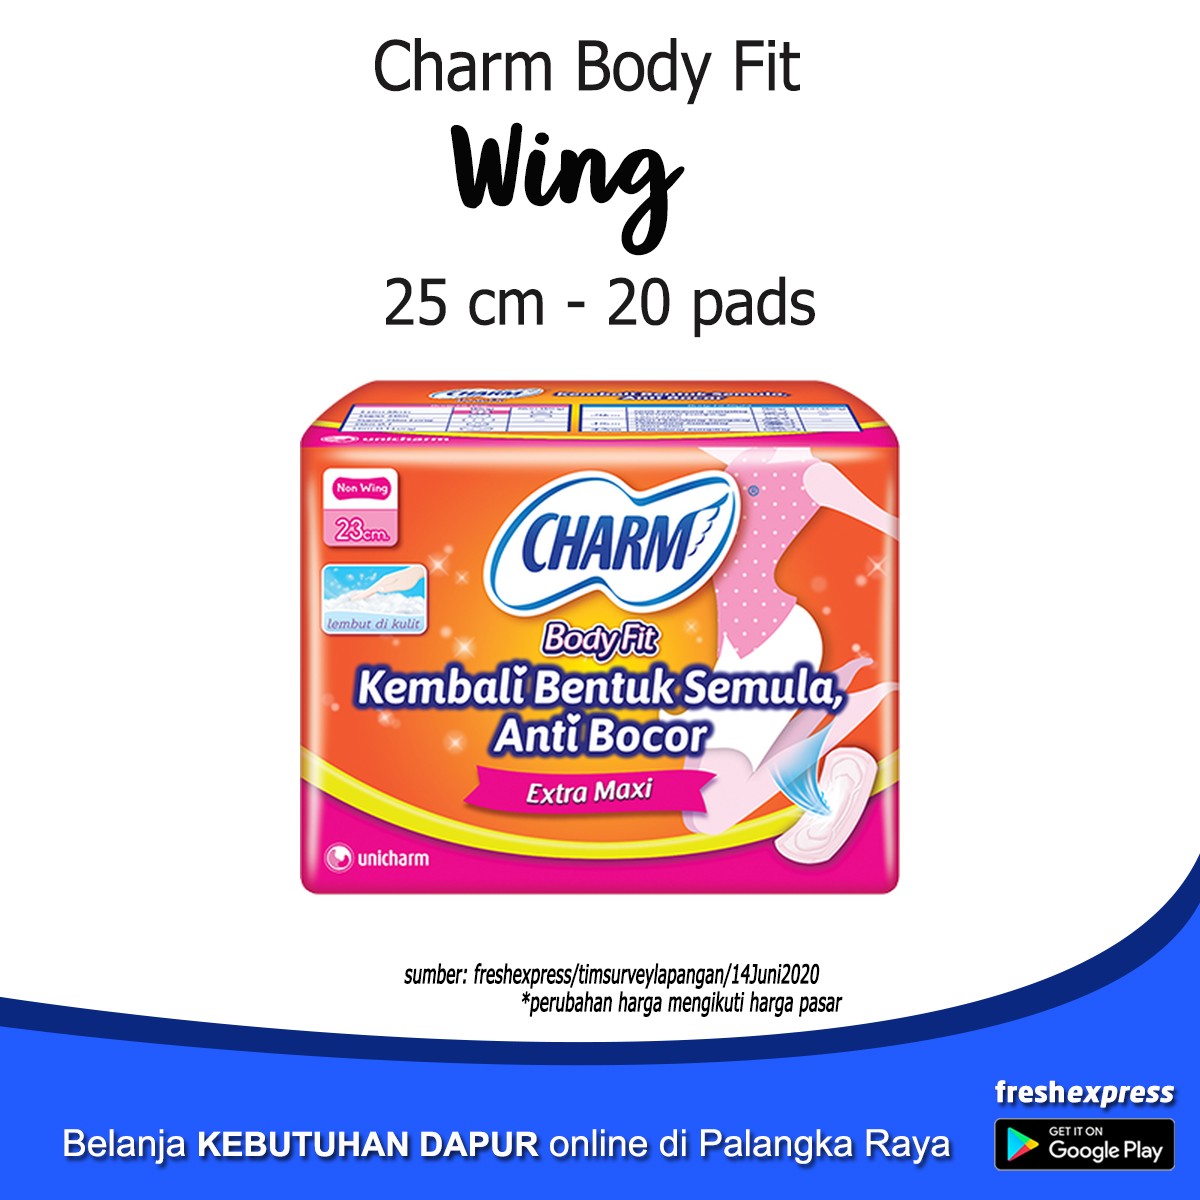 Charm Body Fit 25 Cm Wing 20 Pads